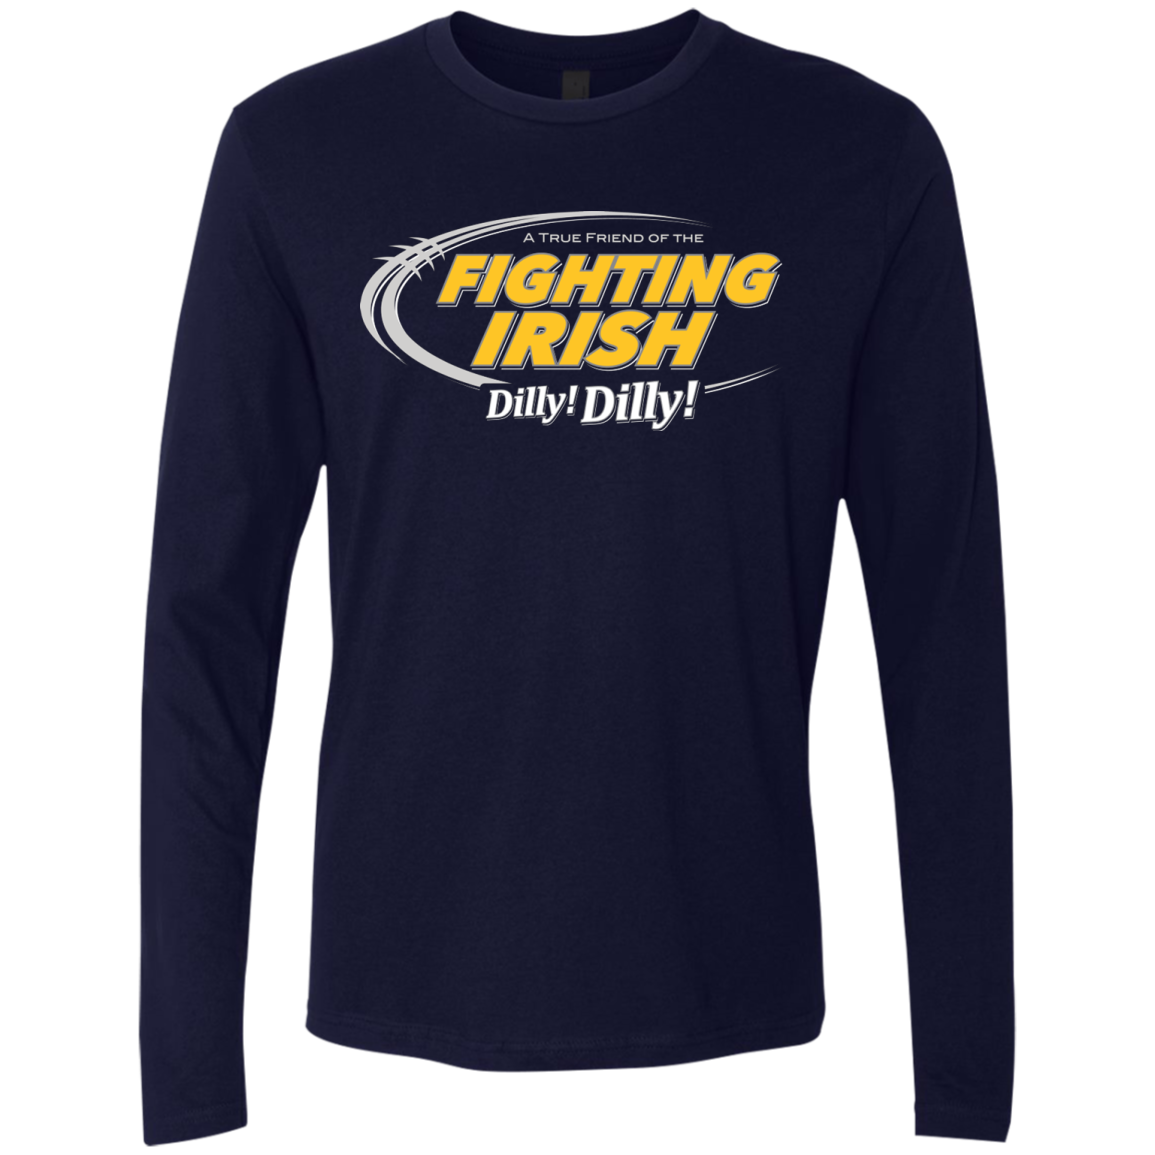 Notre Dame Dilly Dilly Men's Premium Long Sleeve